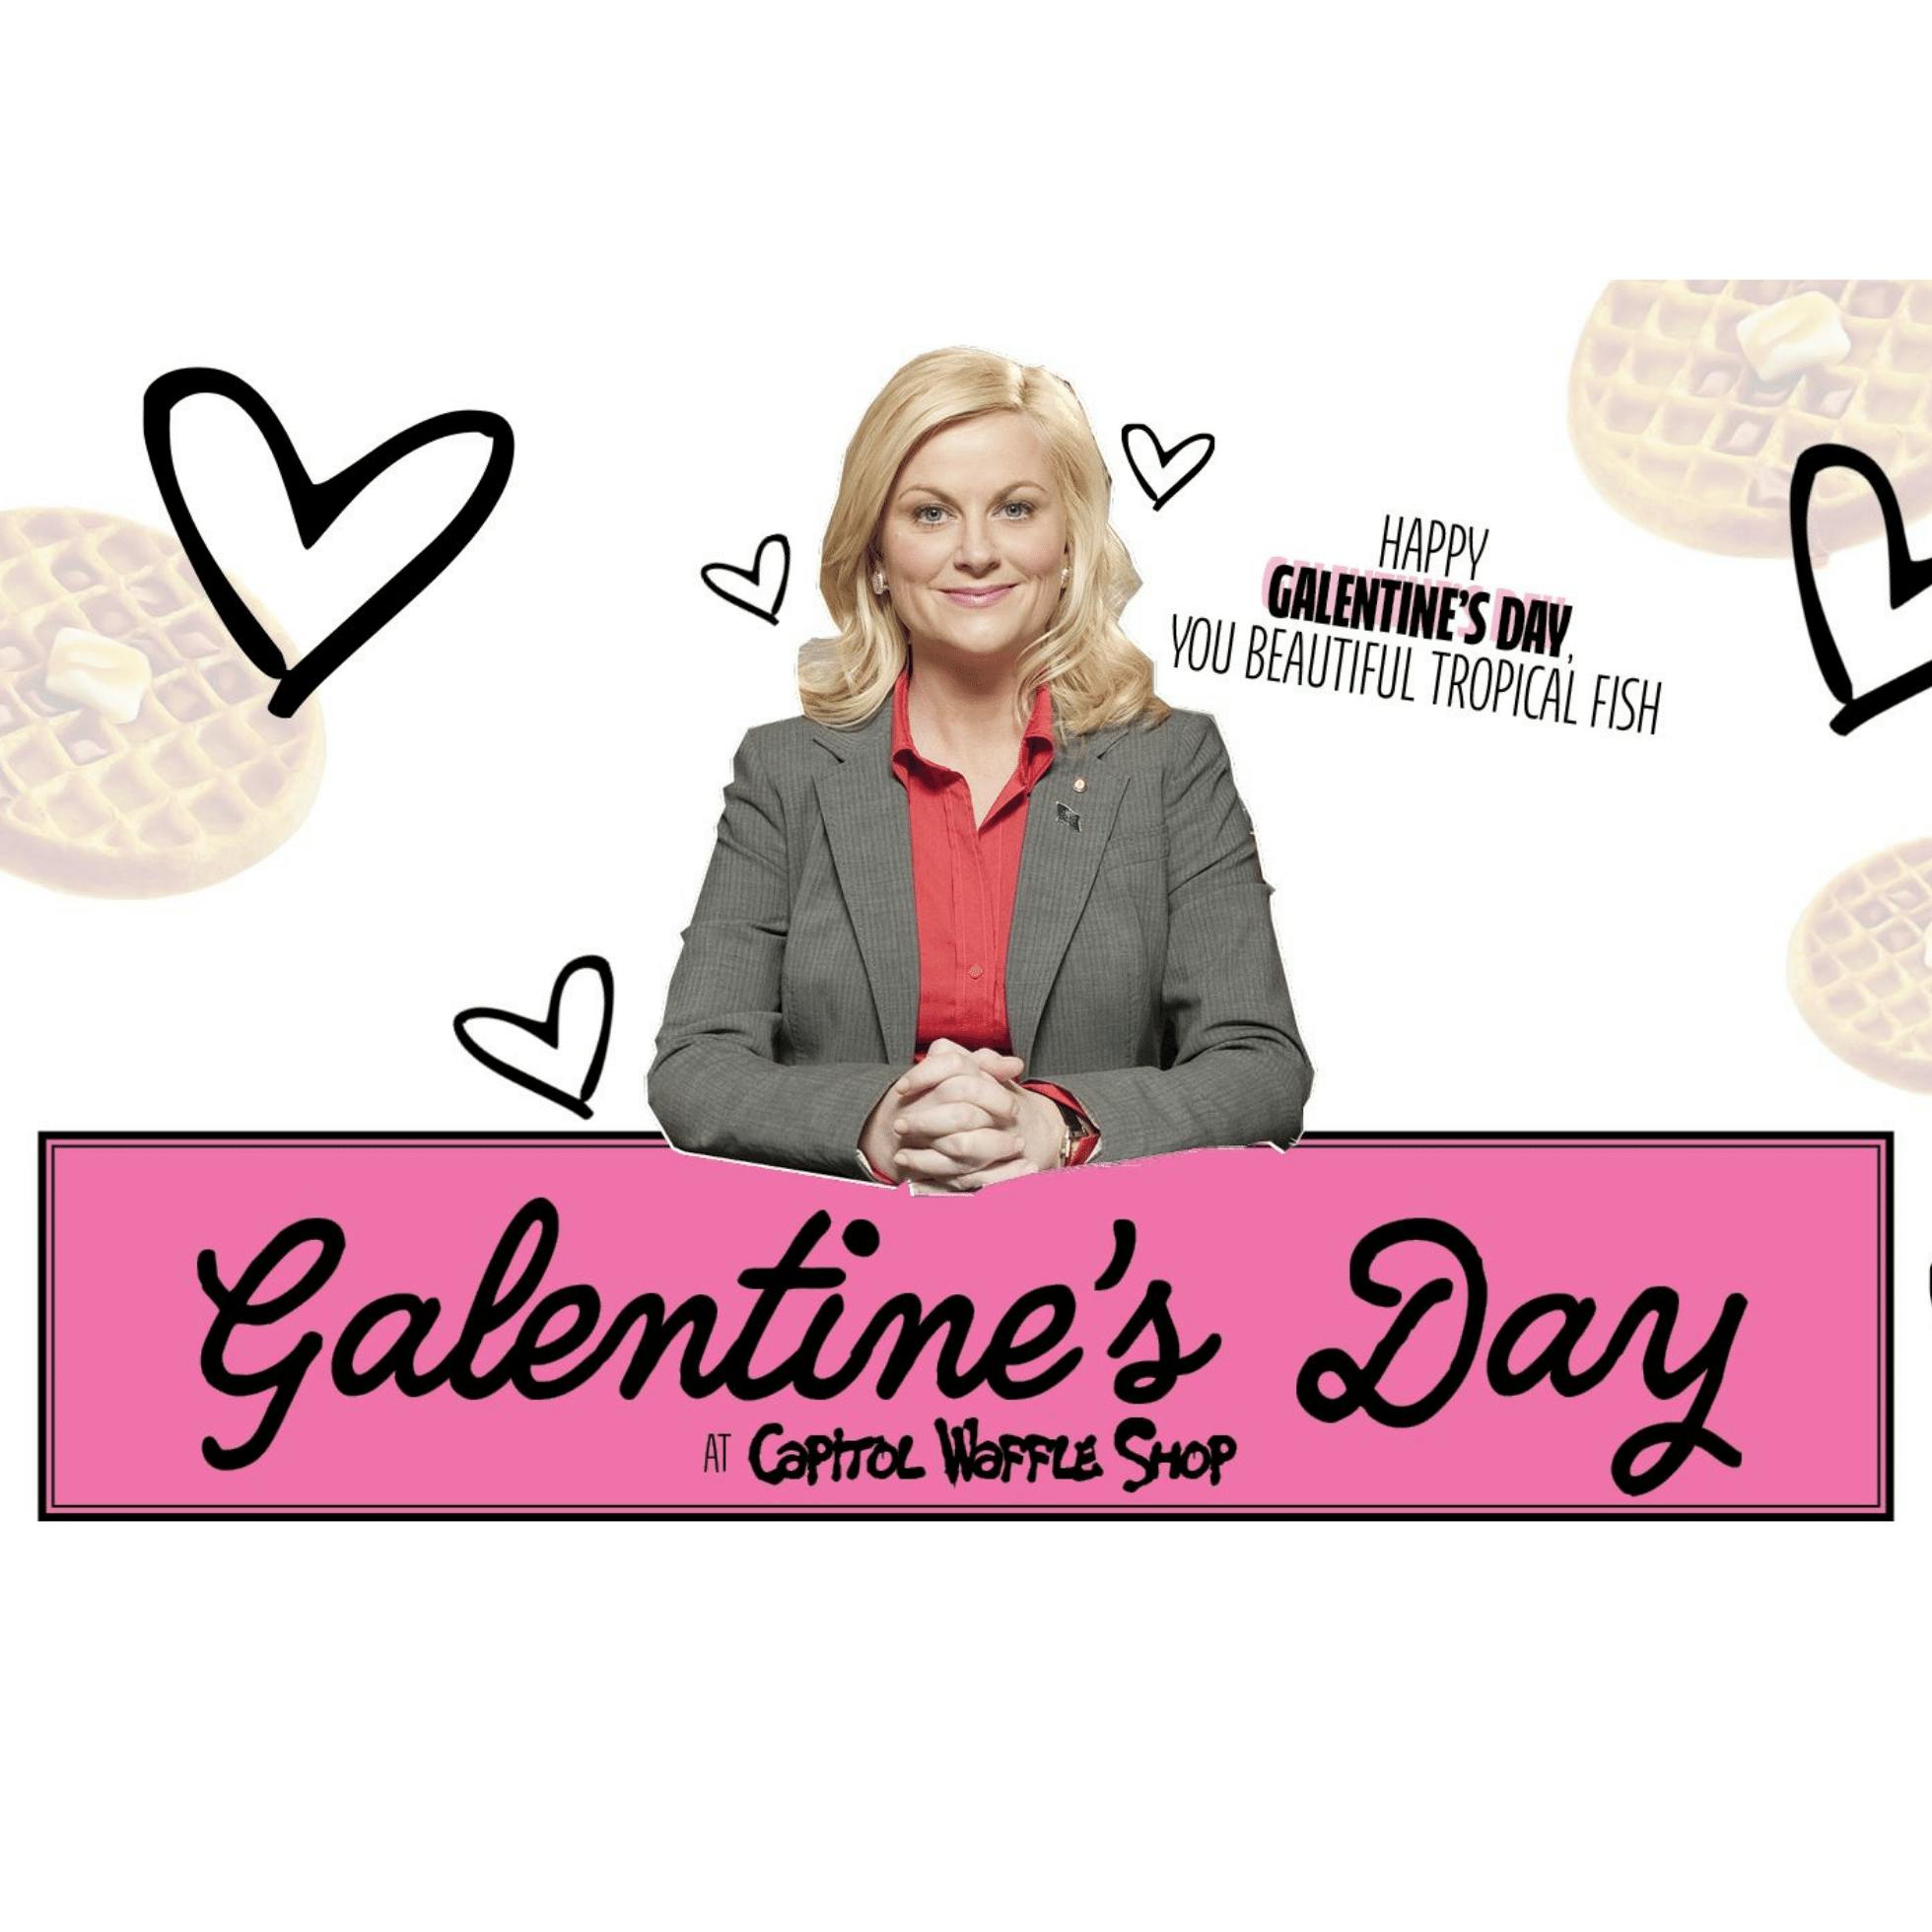 Galentine's Day at Capitol Waffle Shop